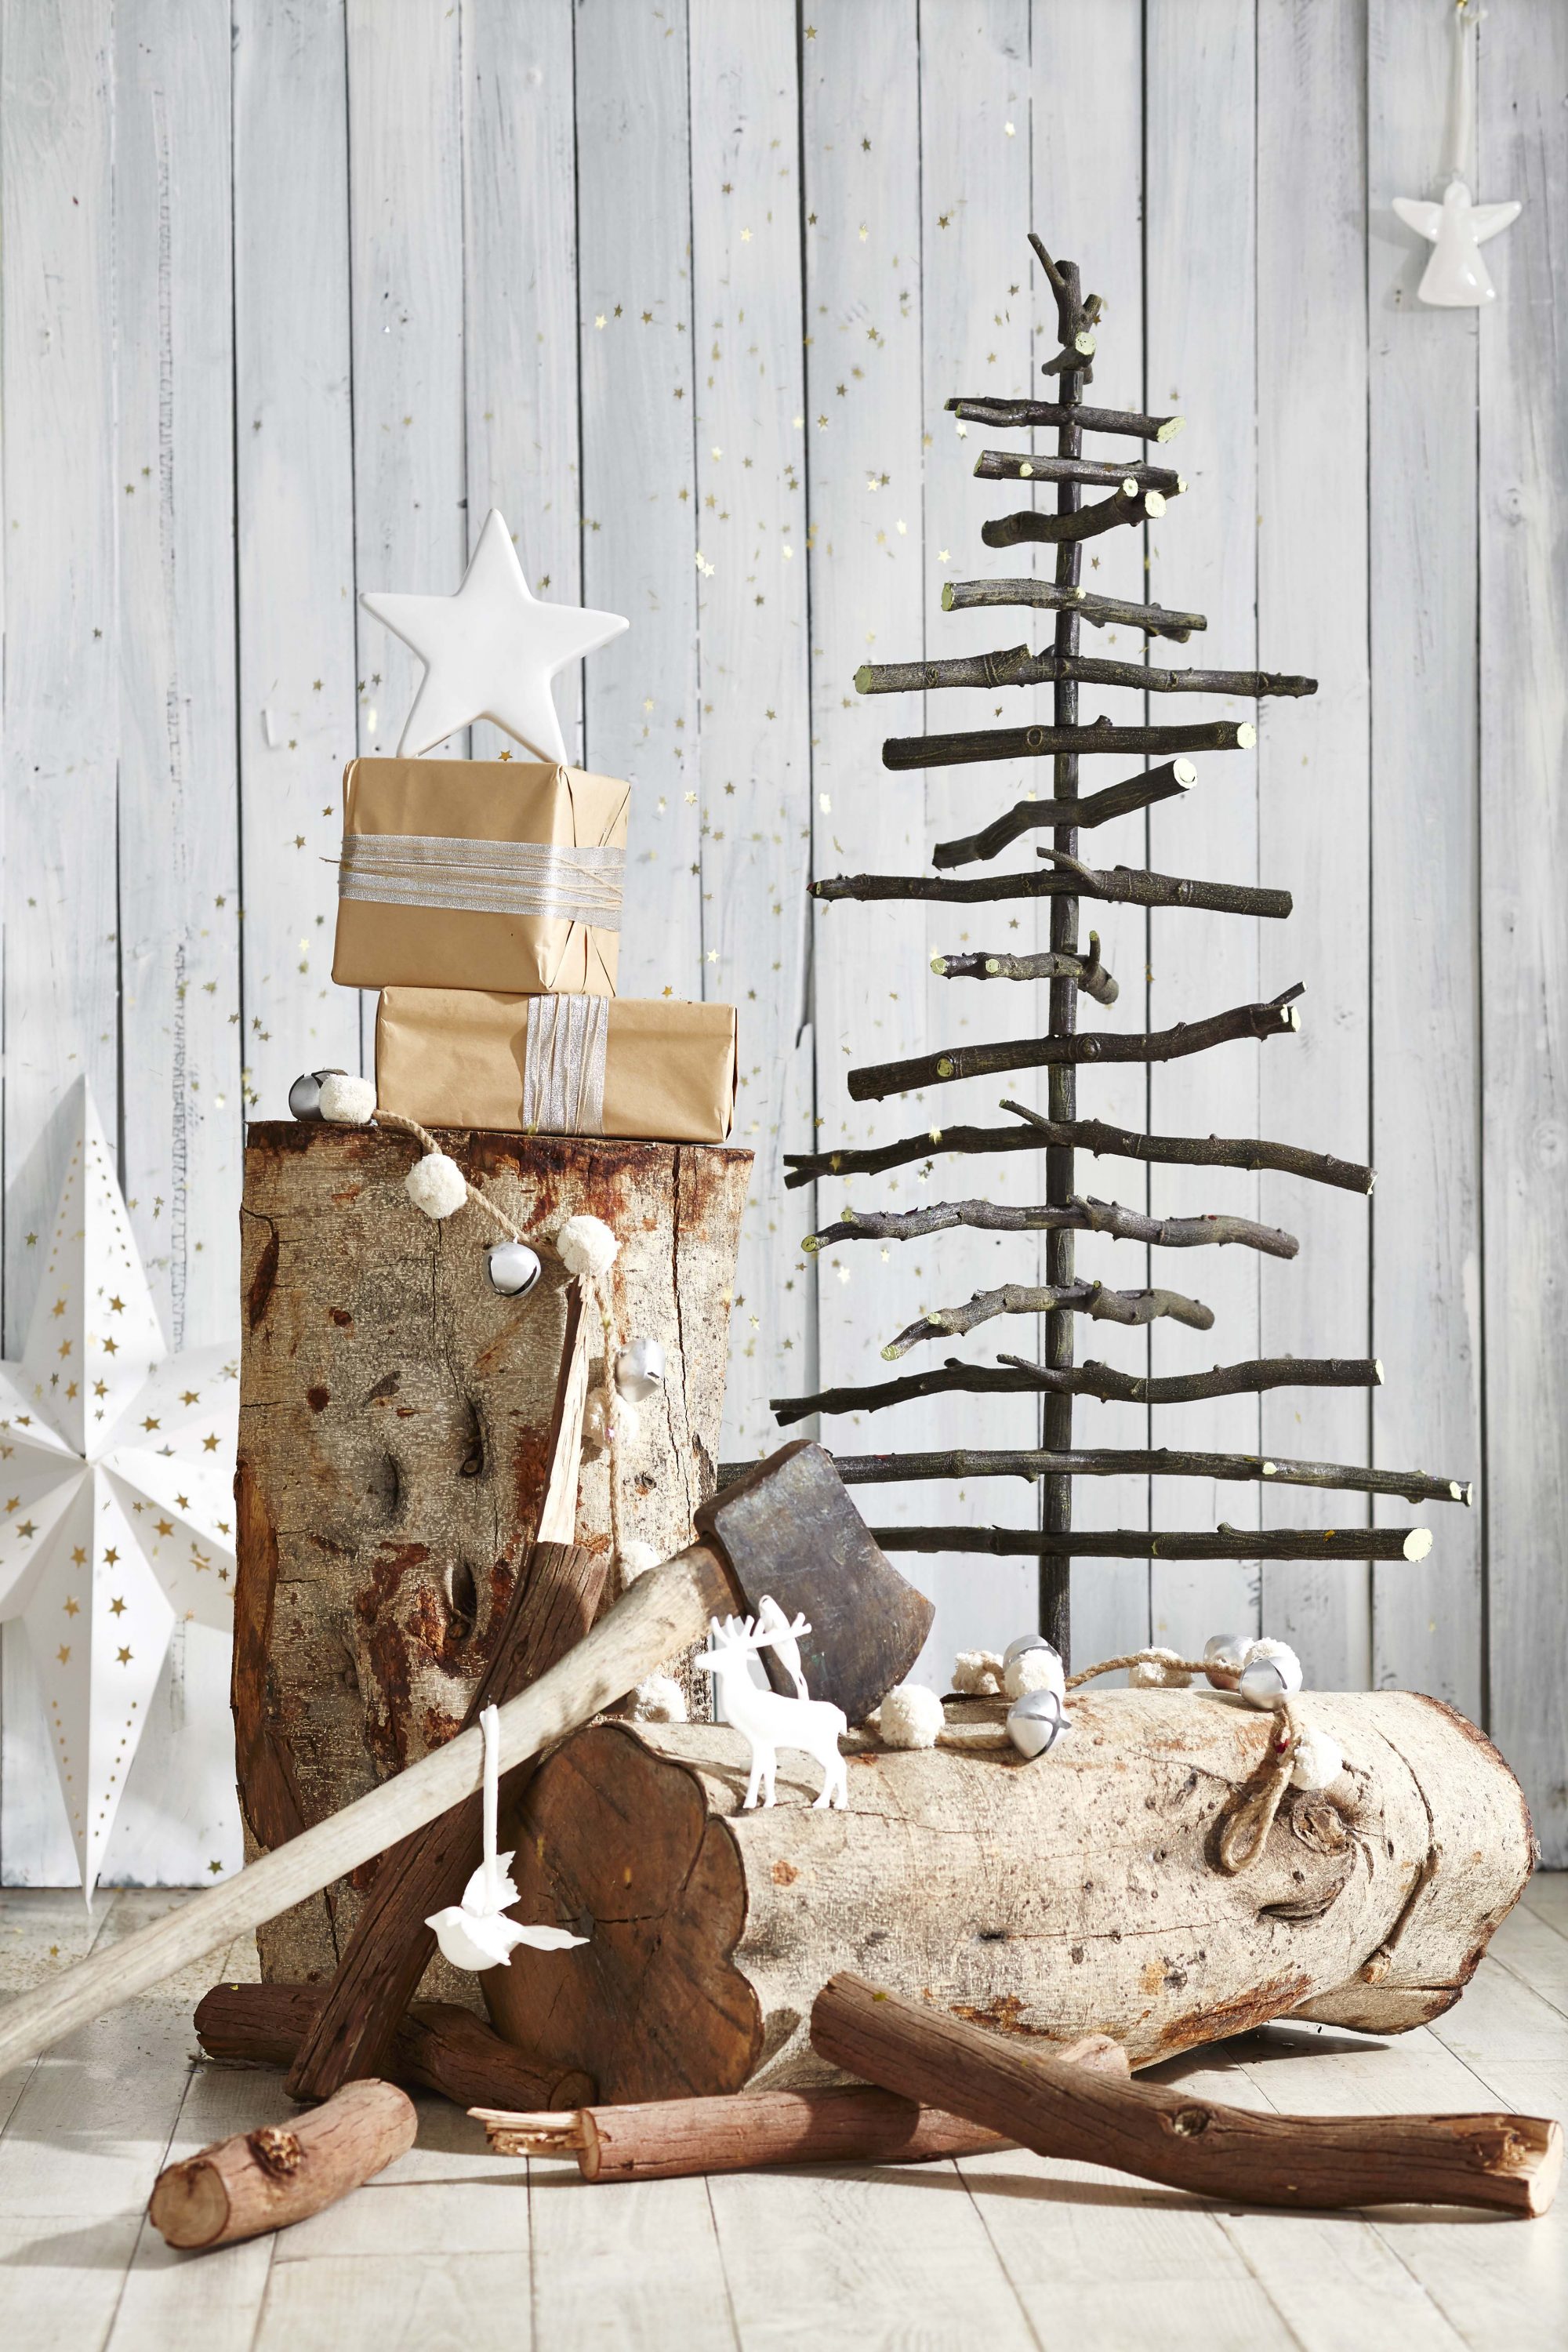 Three checklists to make your Christmas easier - The Interiors Addict